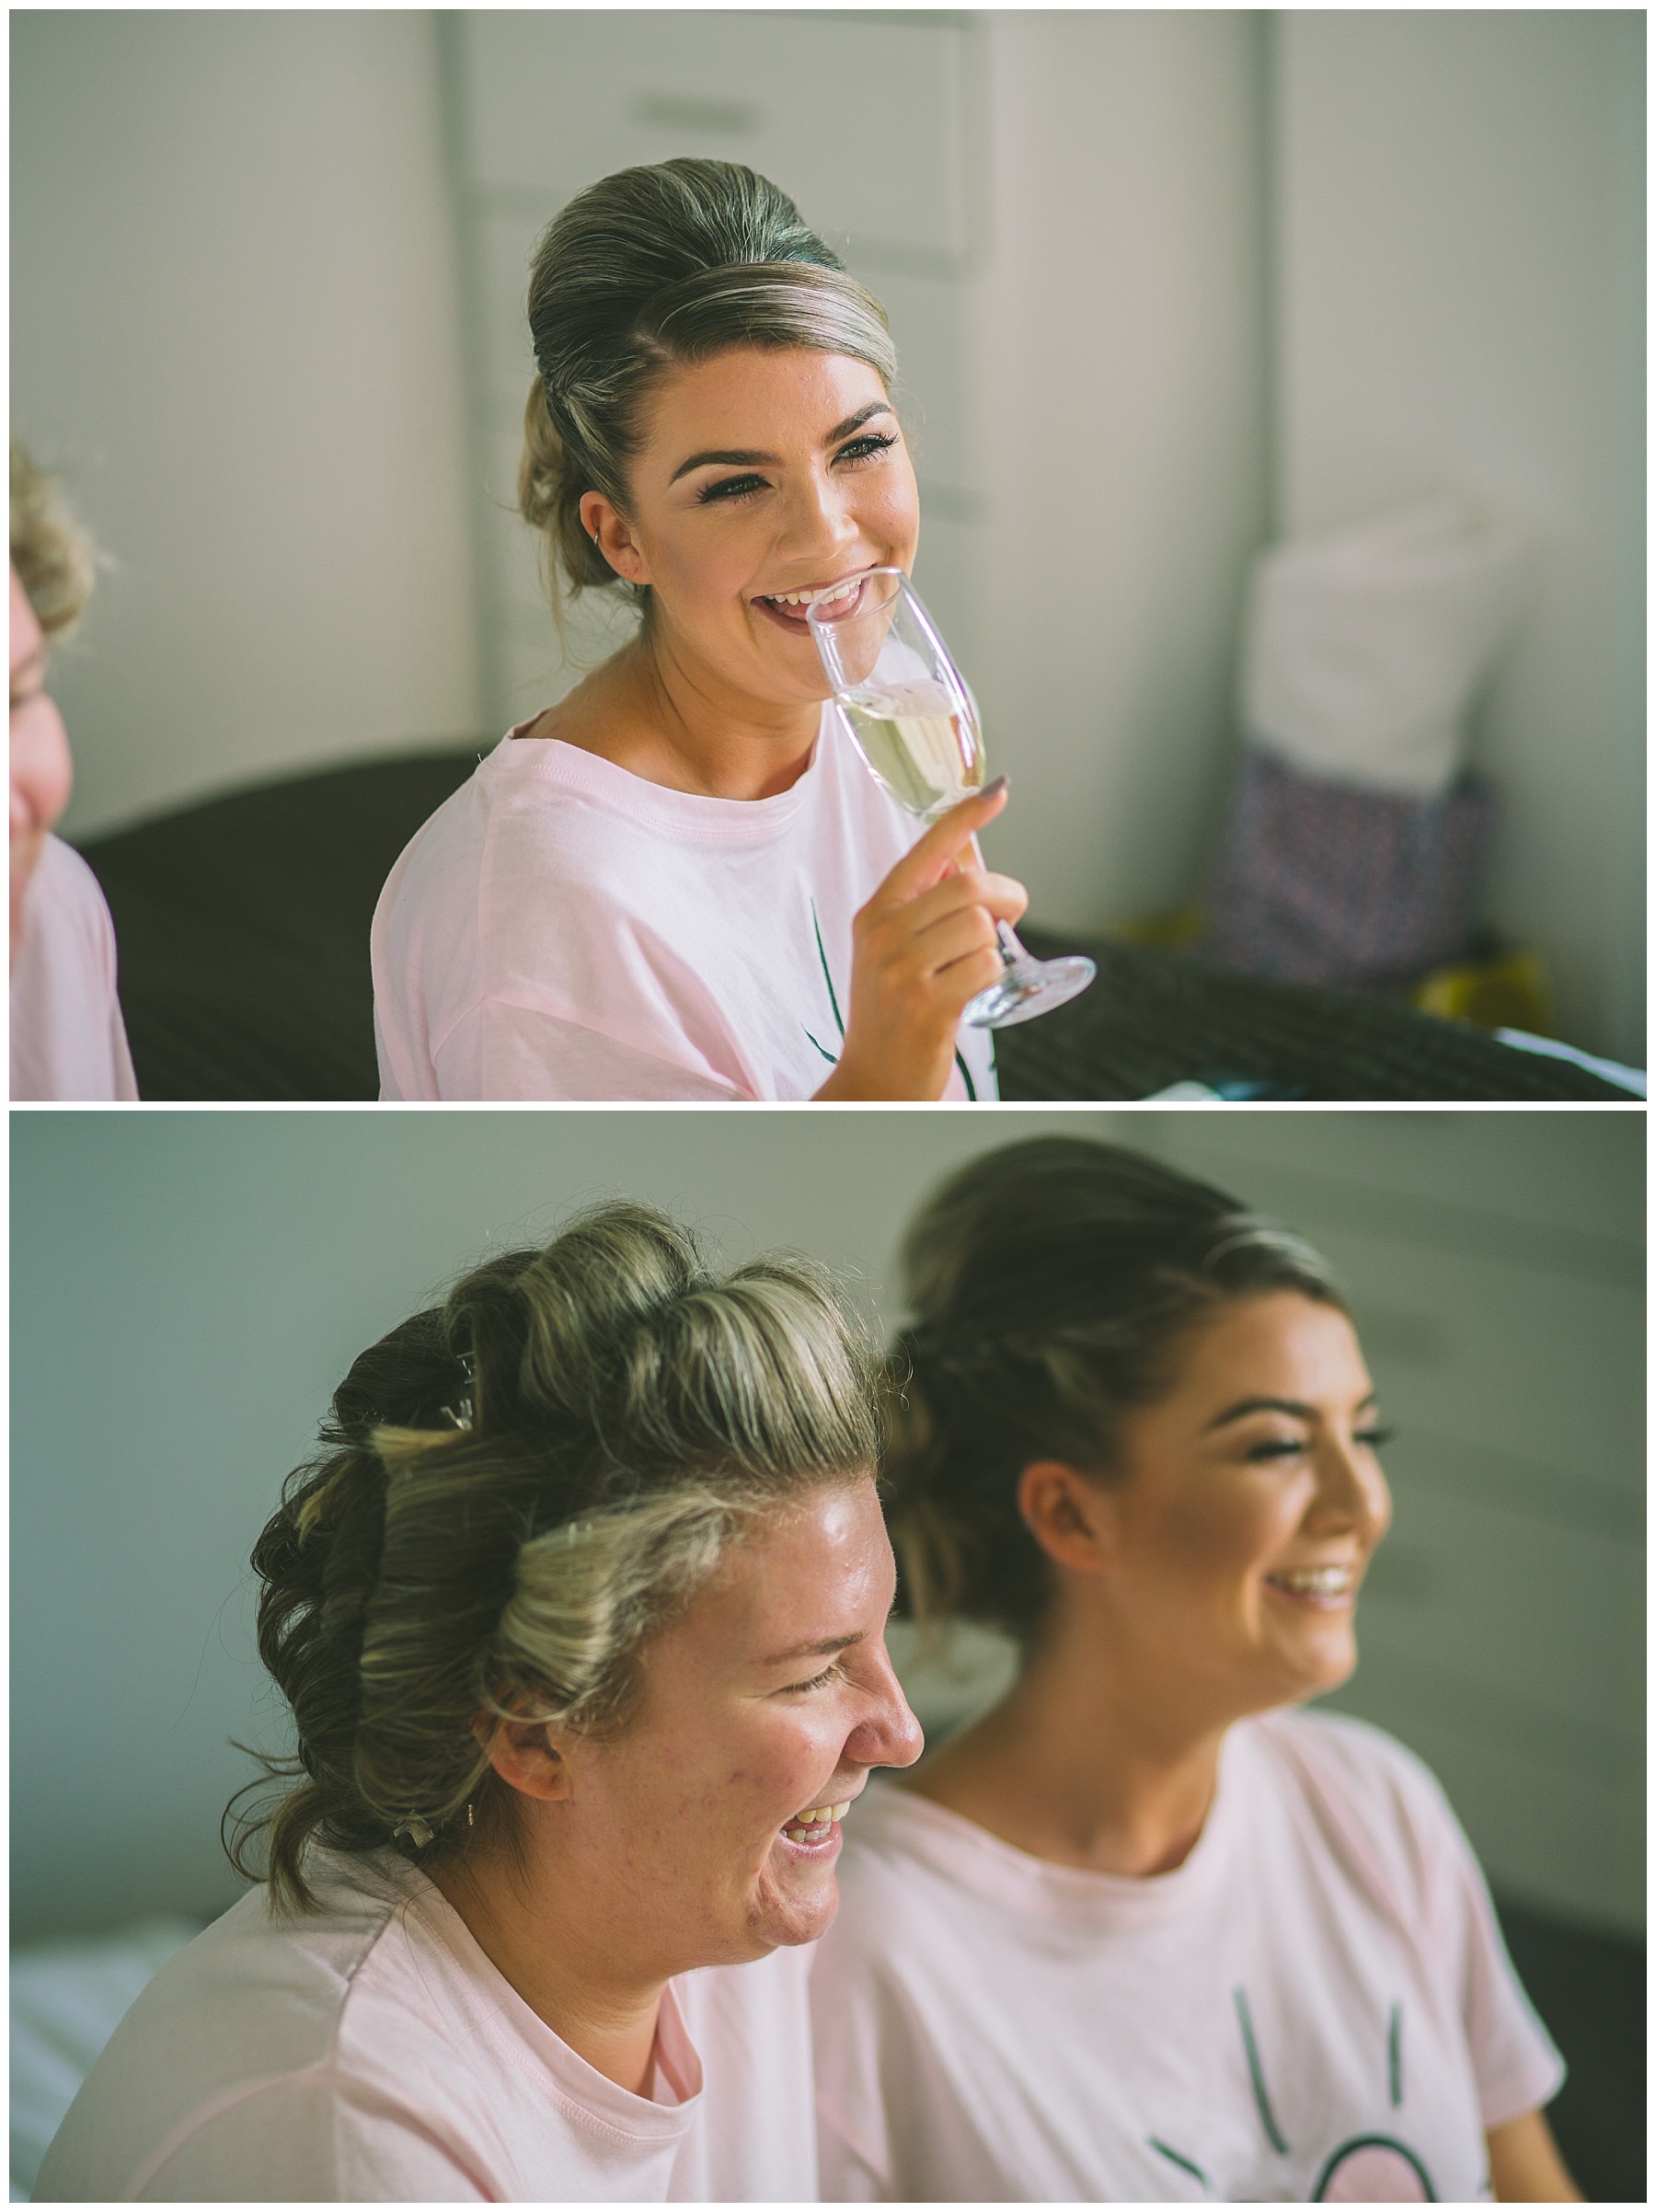 Bride and her sister enjoying the bridal morning